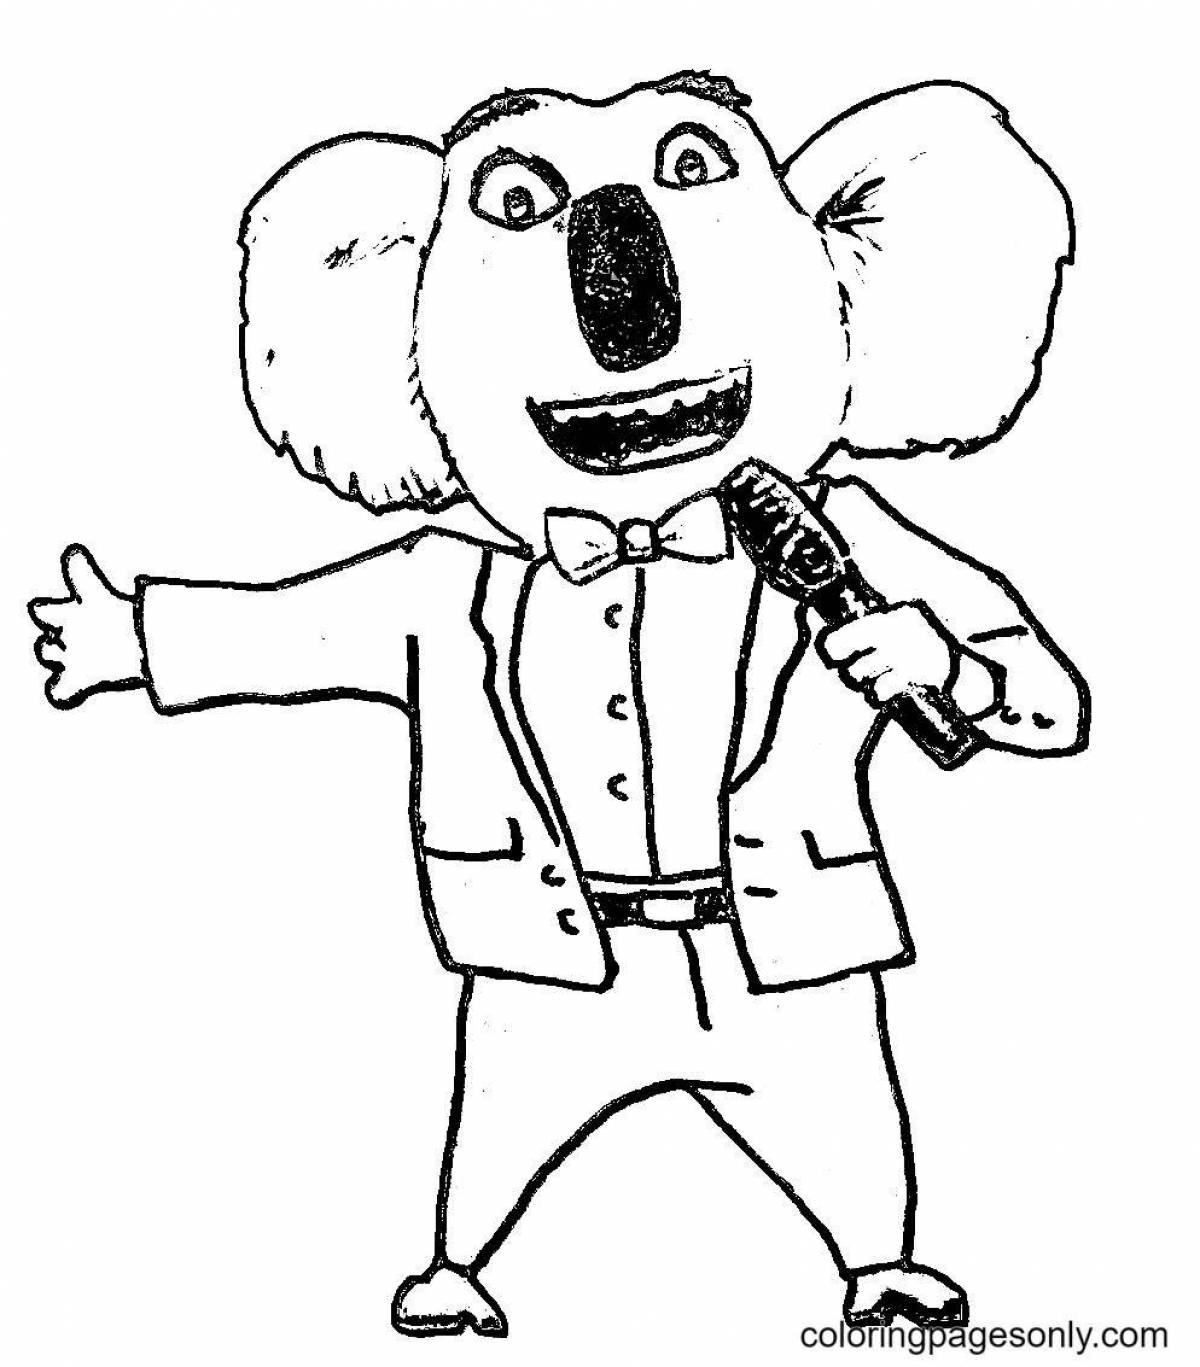 Coloring page wild singer for kids